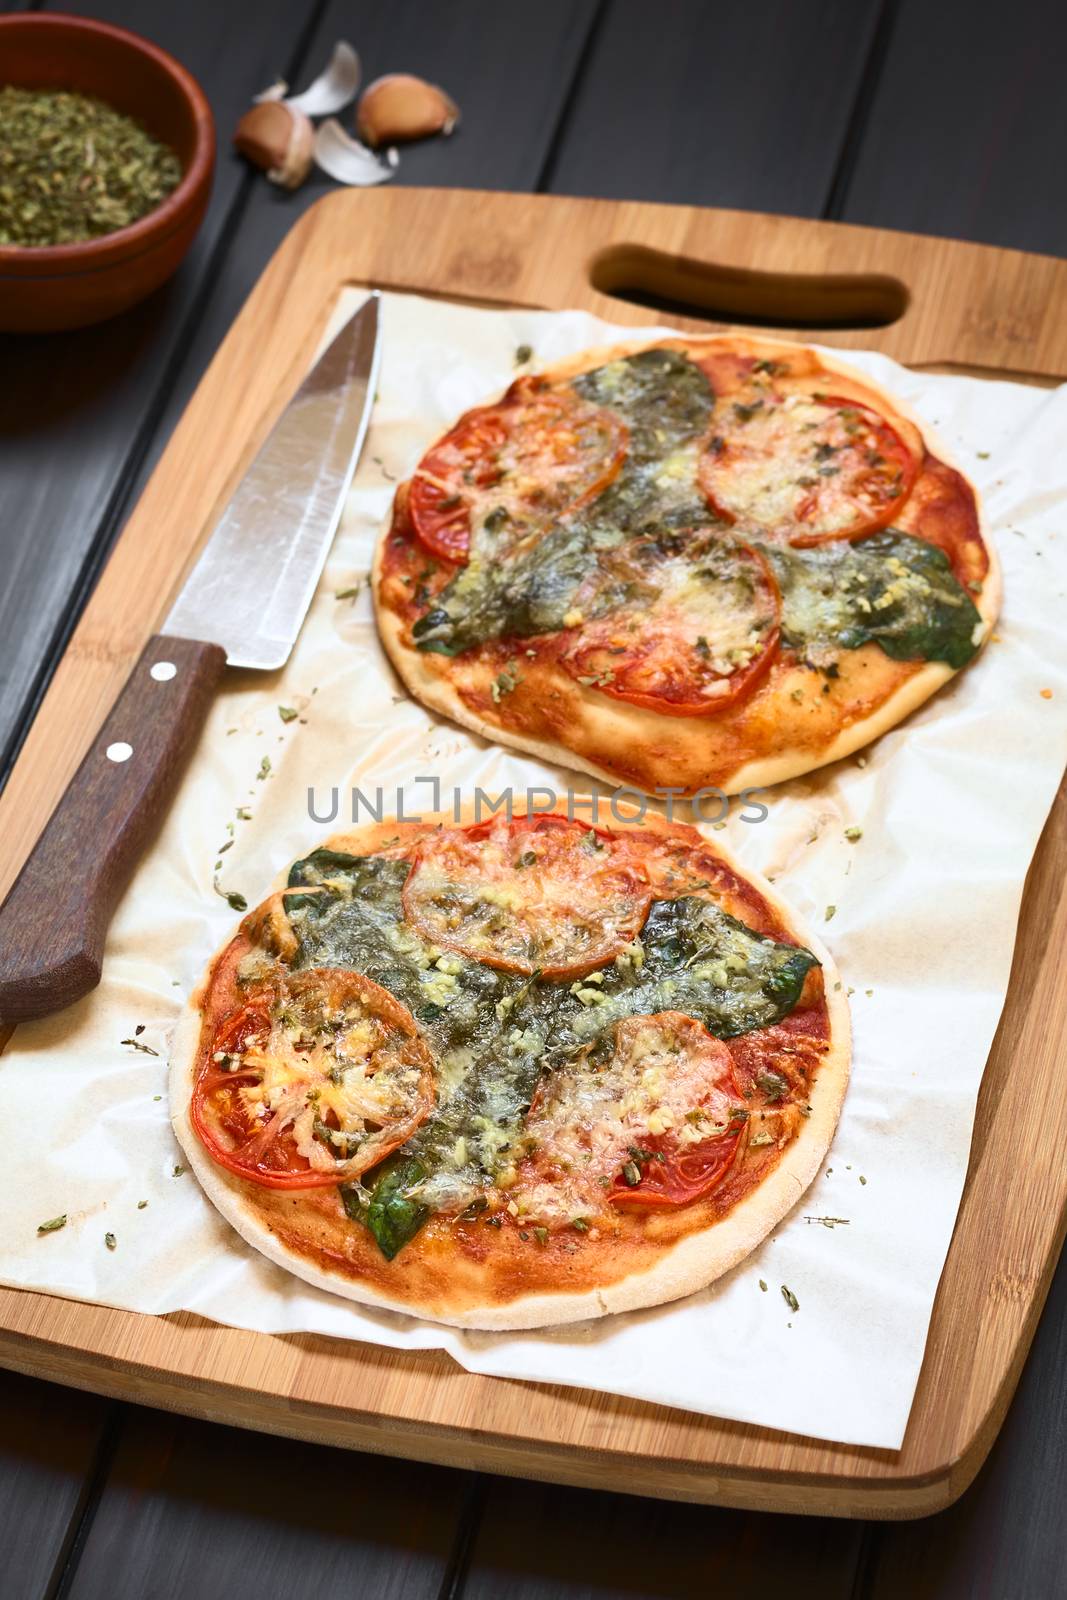 Homemade spinach and tomato pizza on baking paper on wooden board, knife on the side, photographed on dark wood with natural light (Selective Focus, Focus one third into the image)